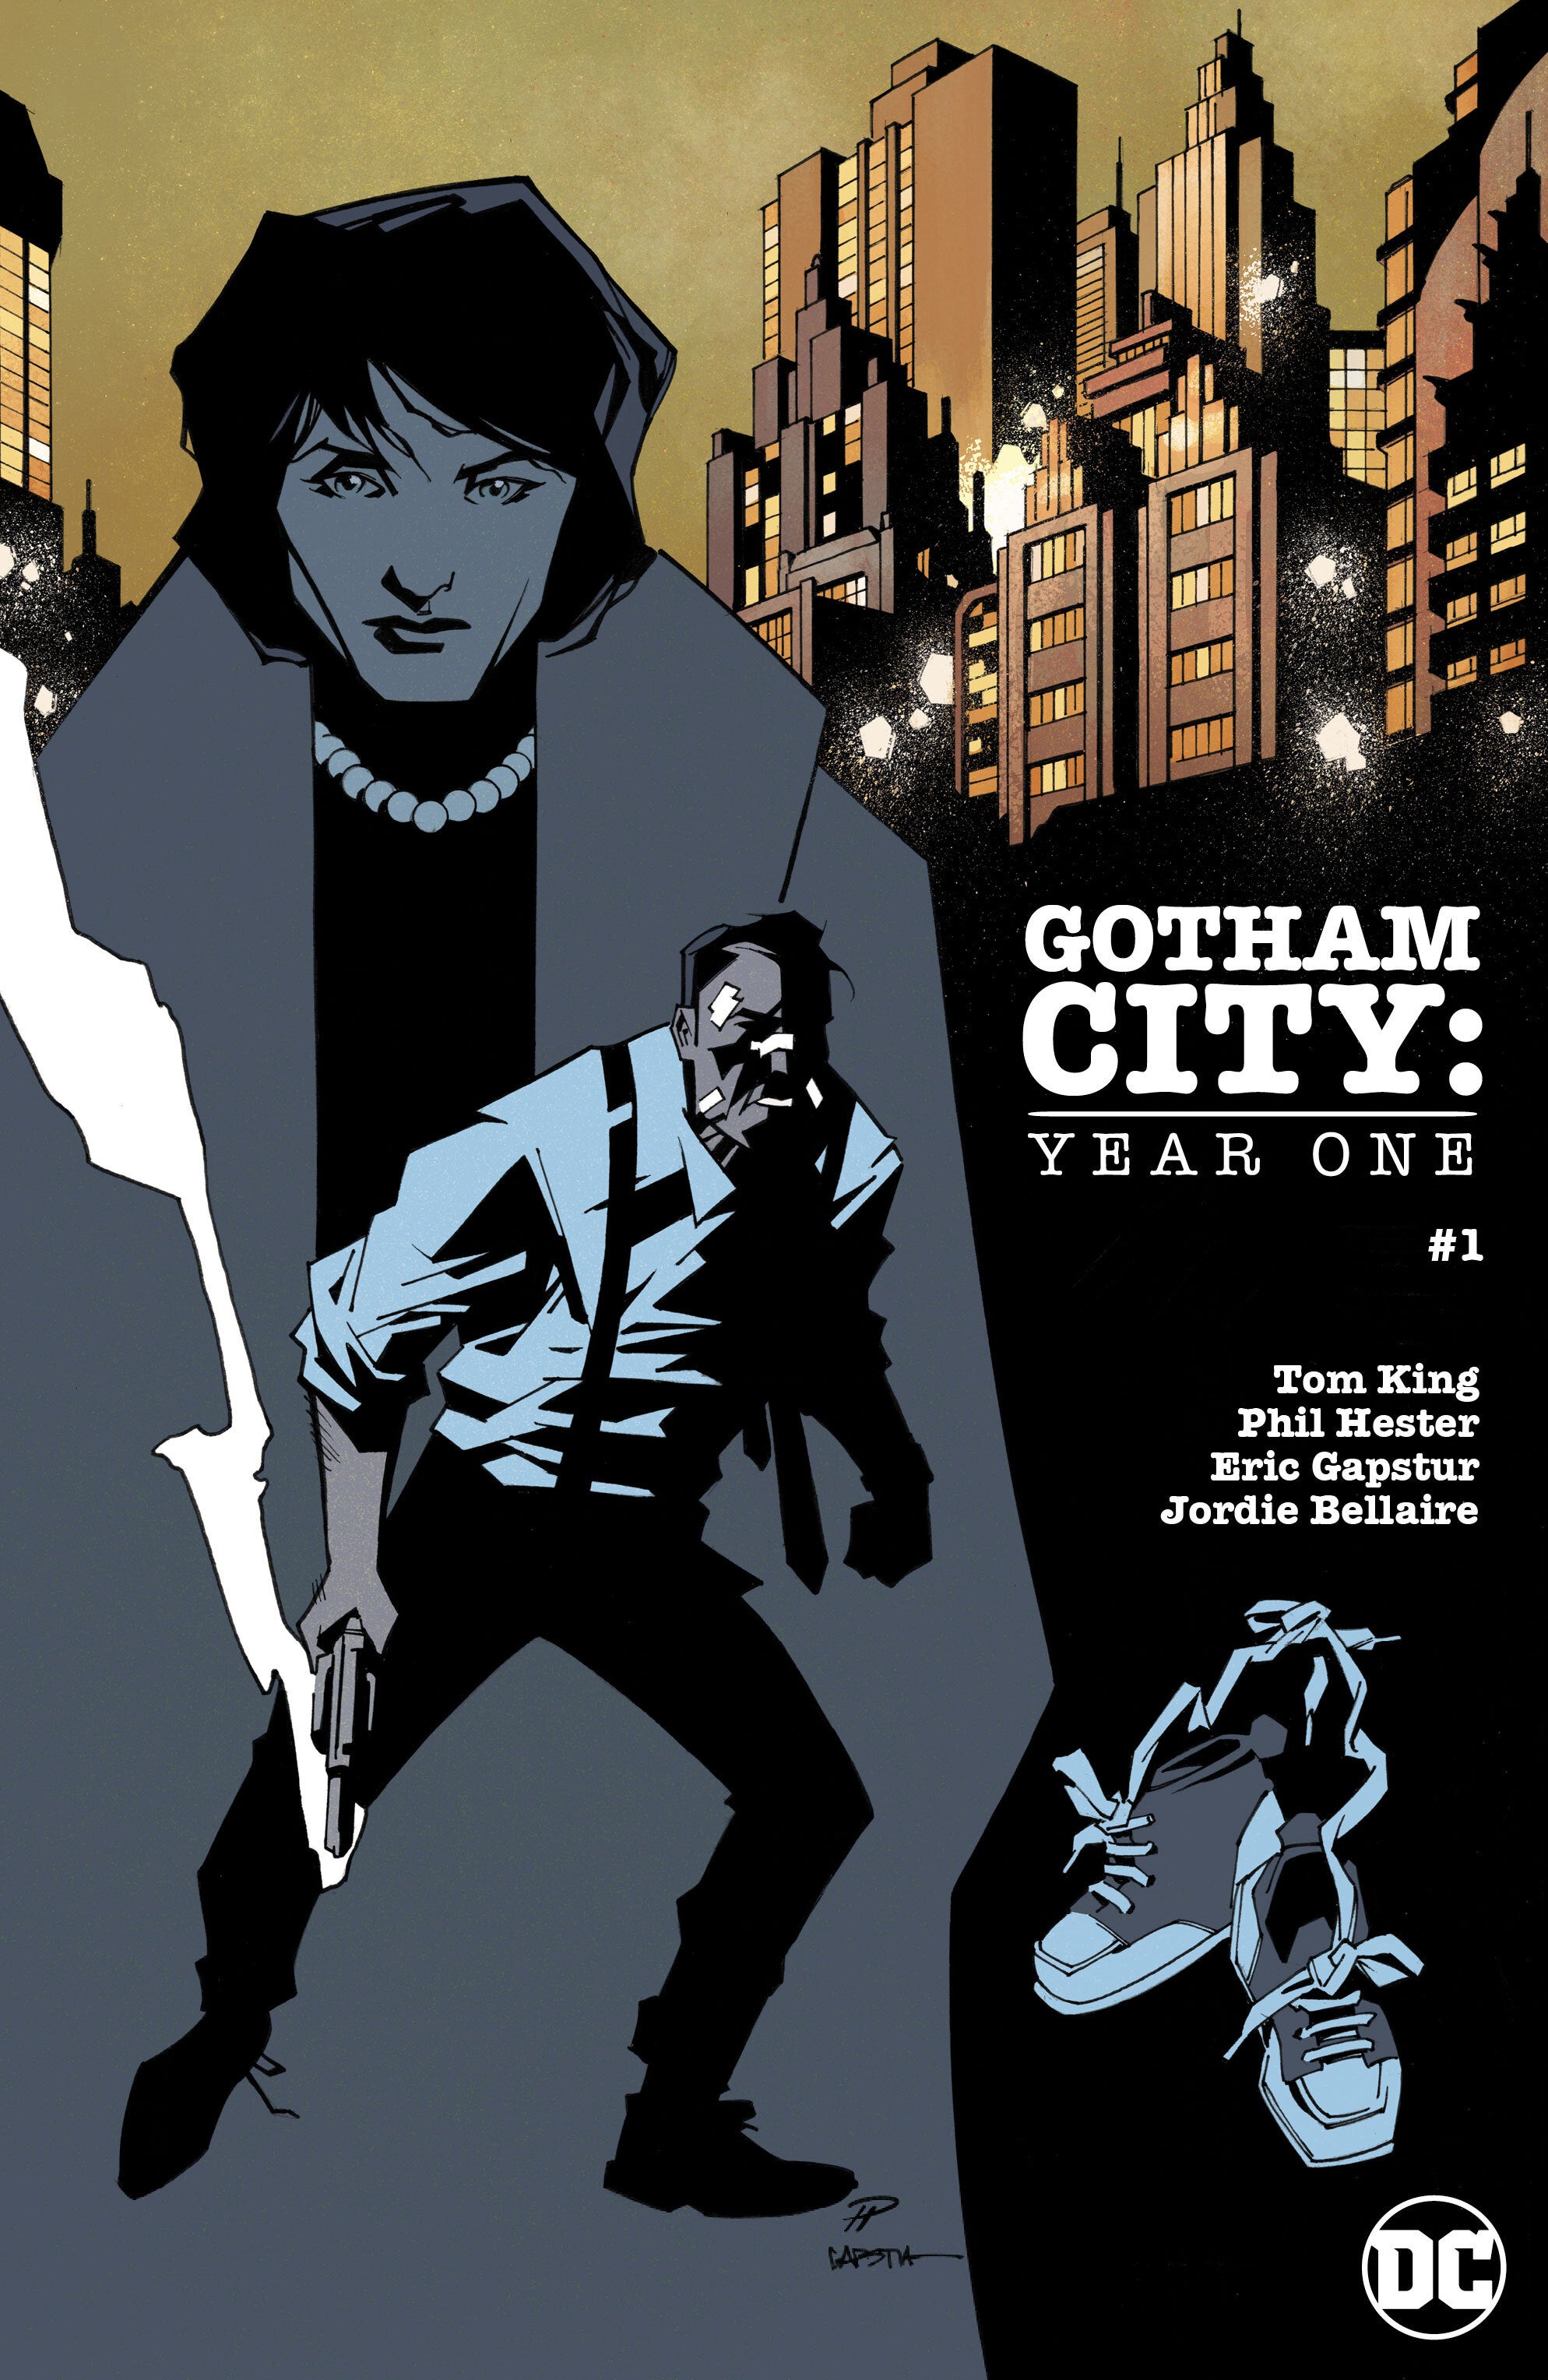 Gotham City: Year One #1 cover by Phil Hester, Eric Gapstur, and Jordie Bellaire